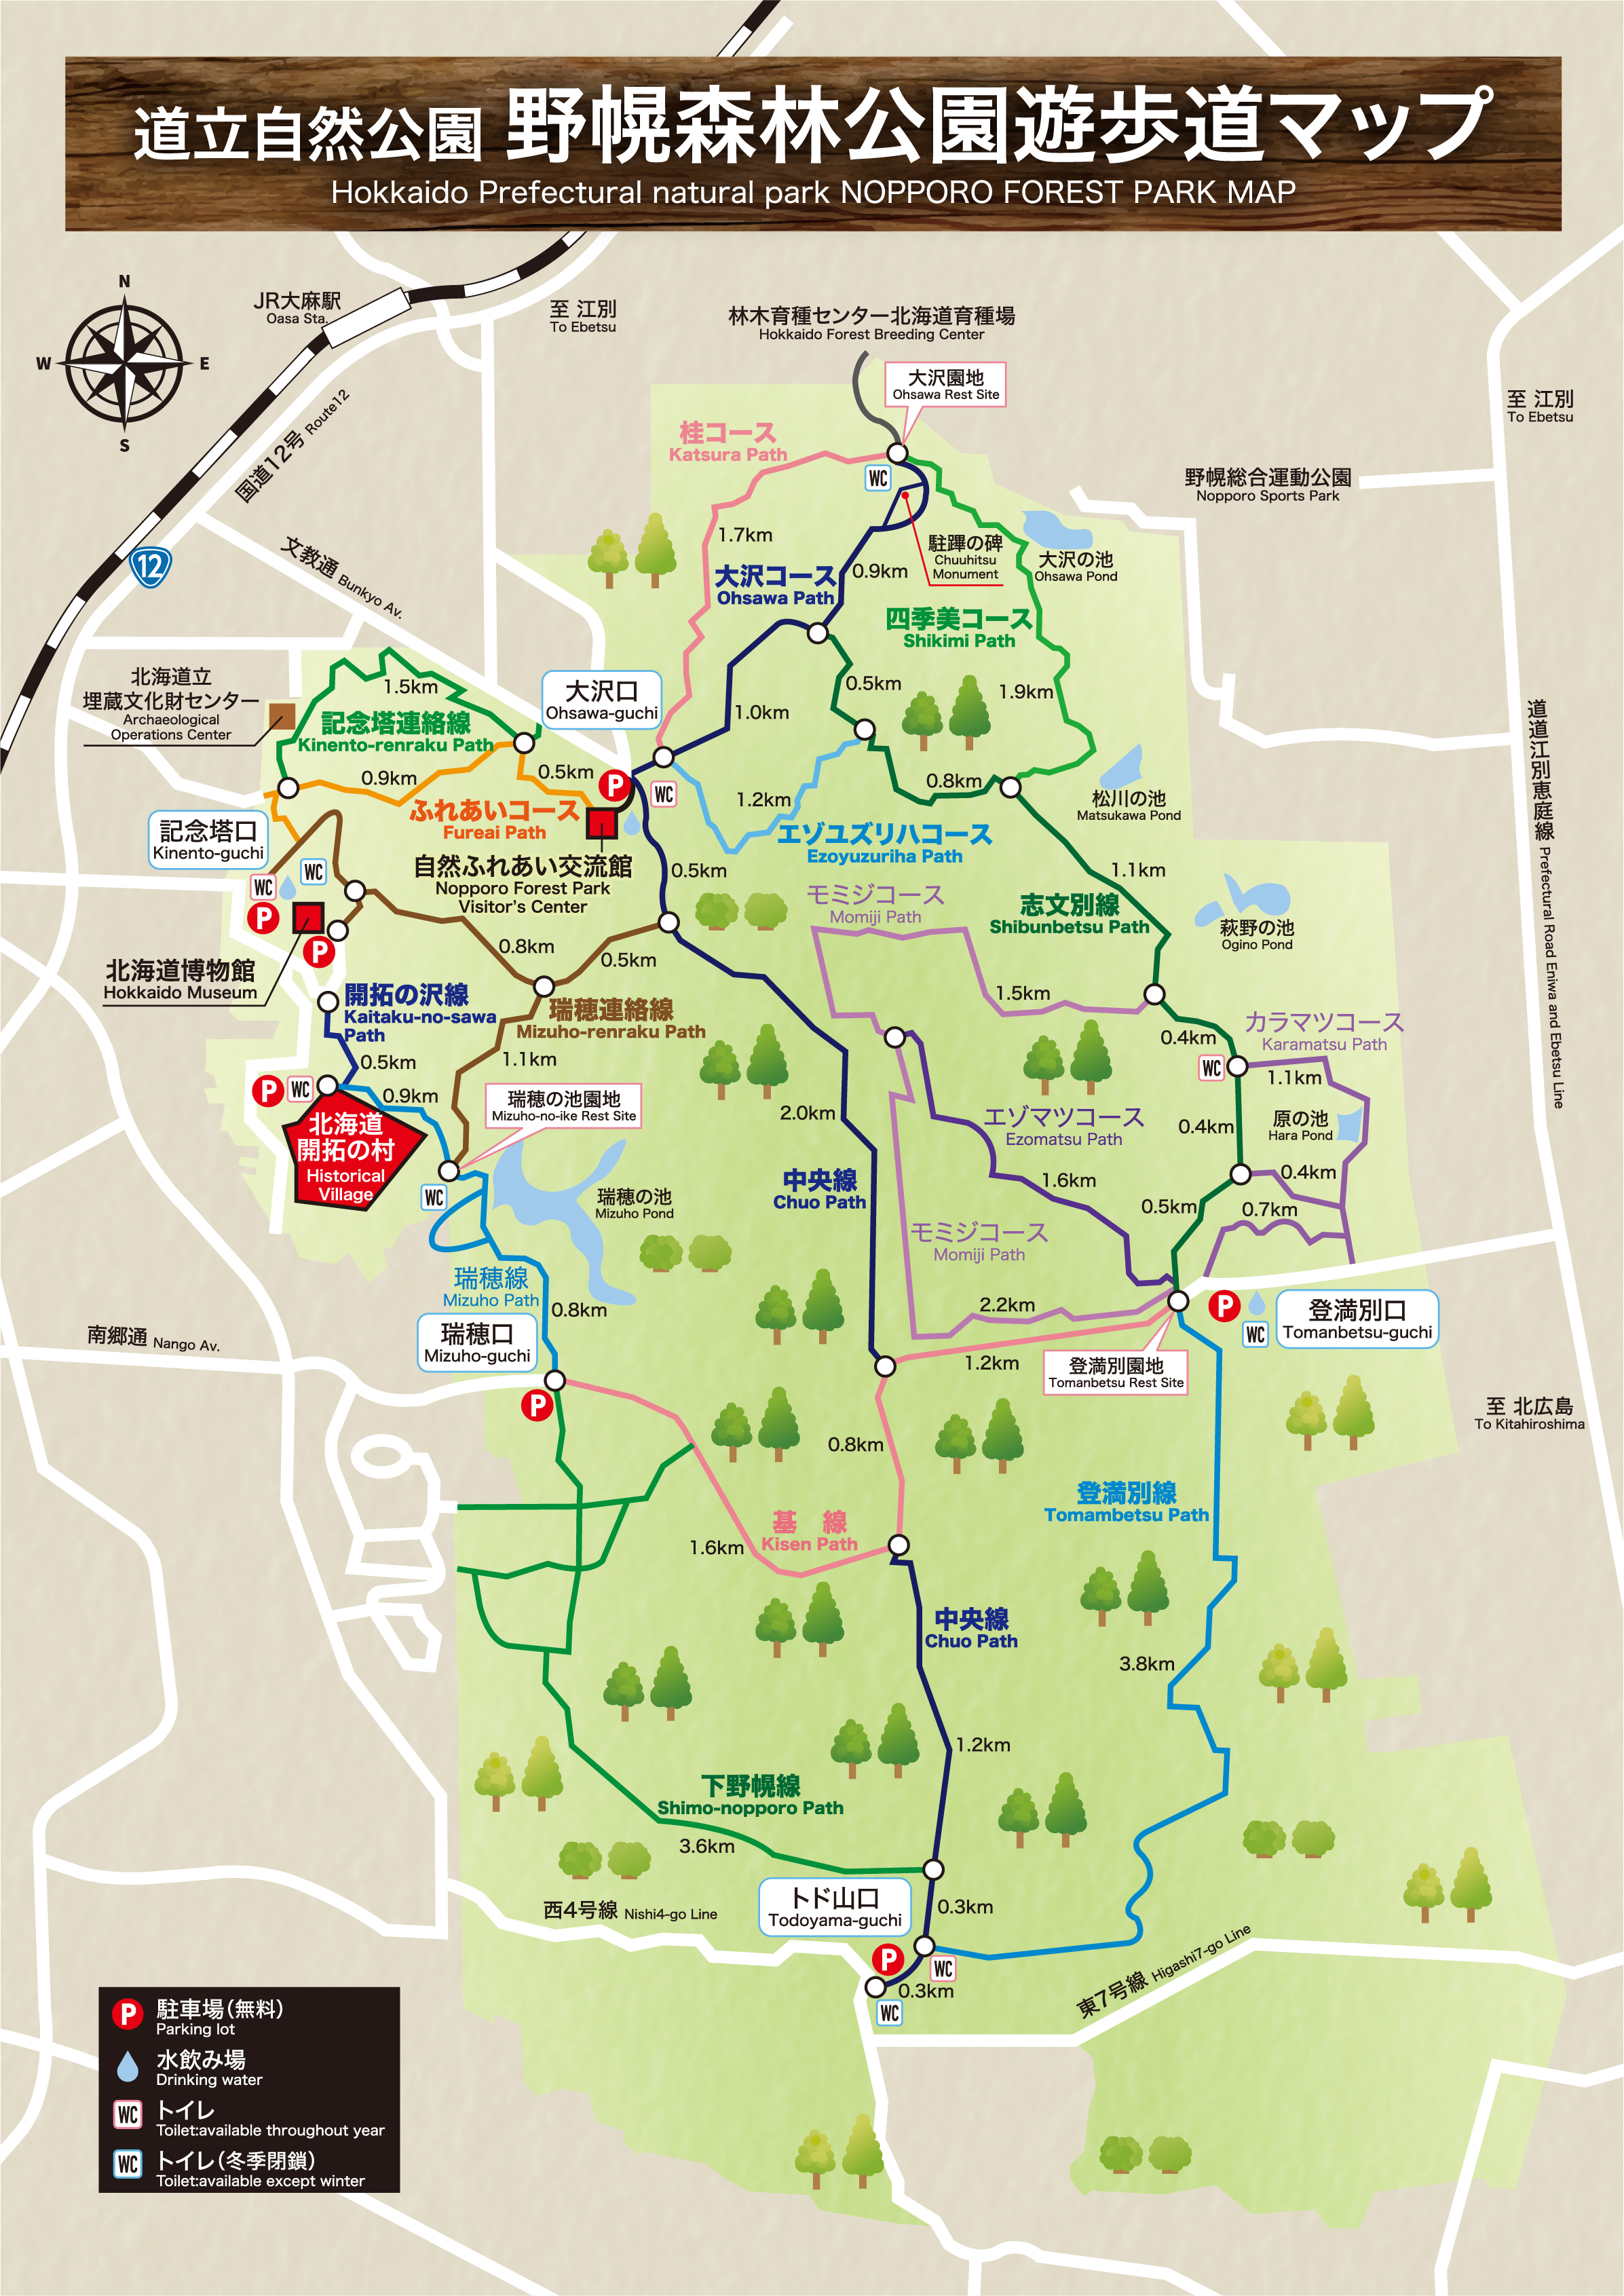 Hokkaido Prefectural natural park NOPPORO FOREST PARK MAP